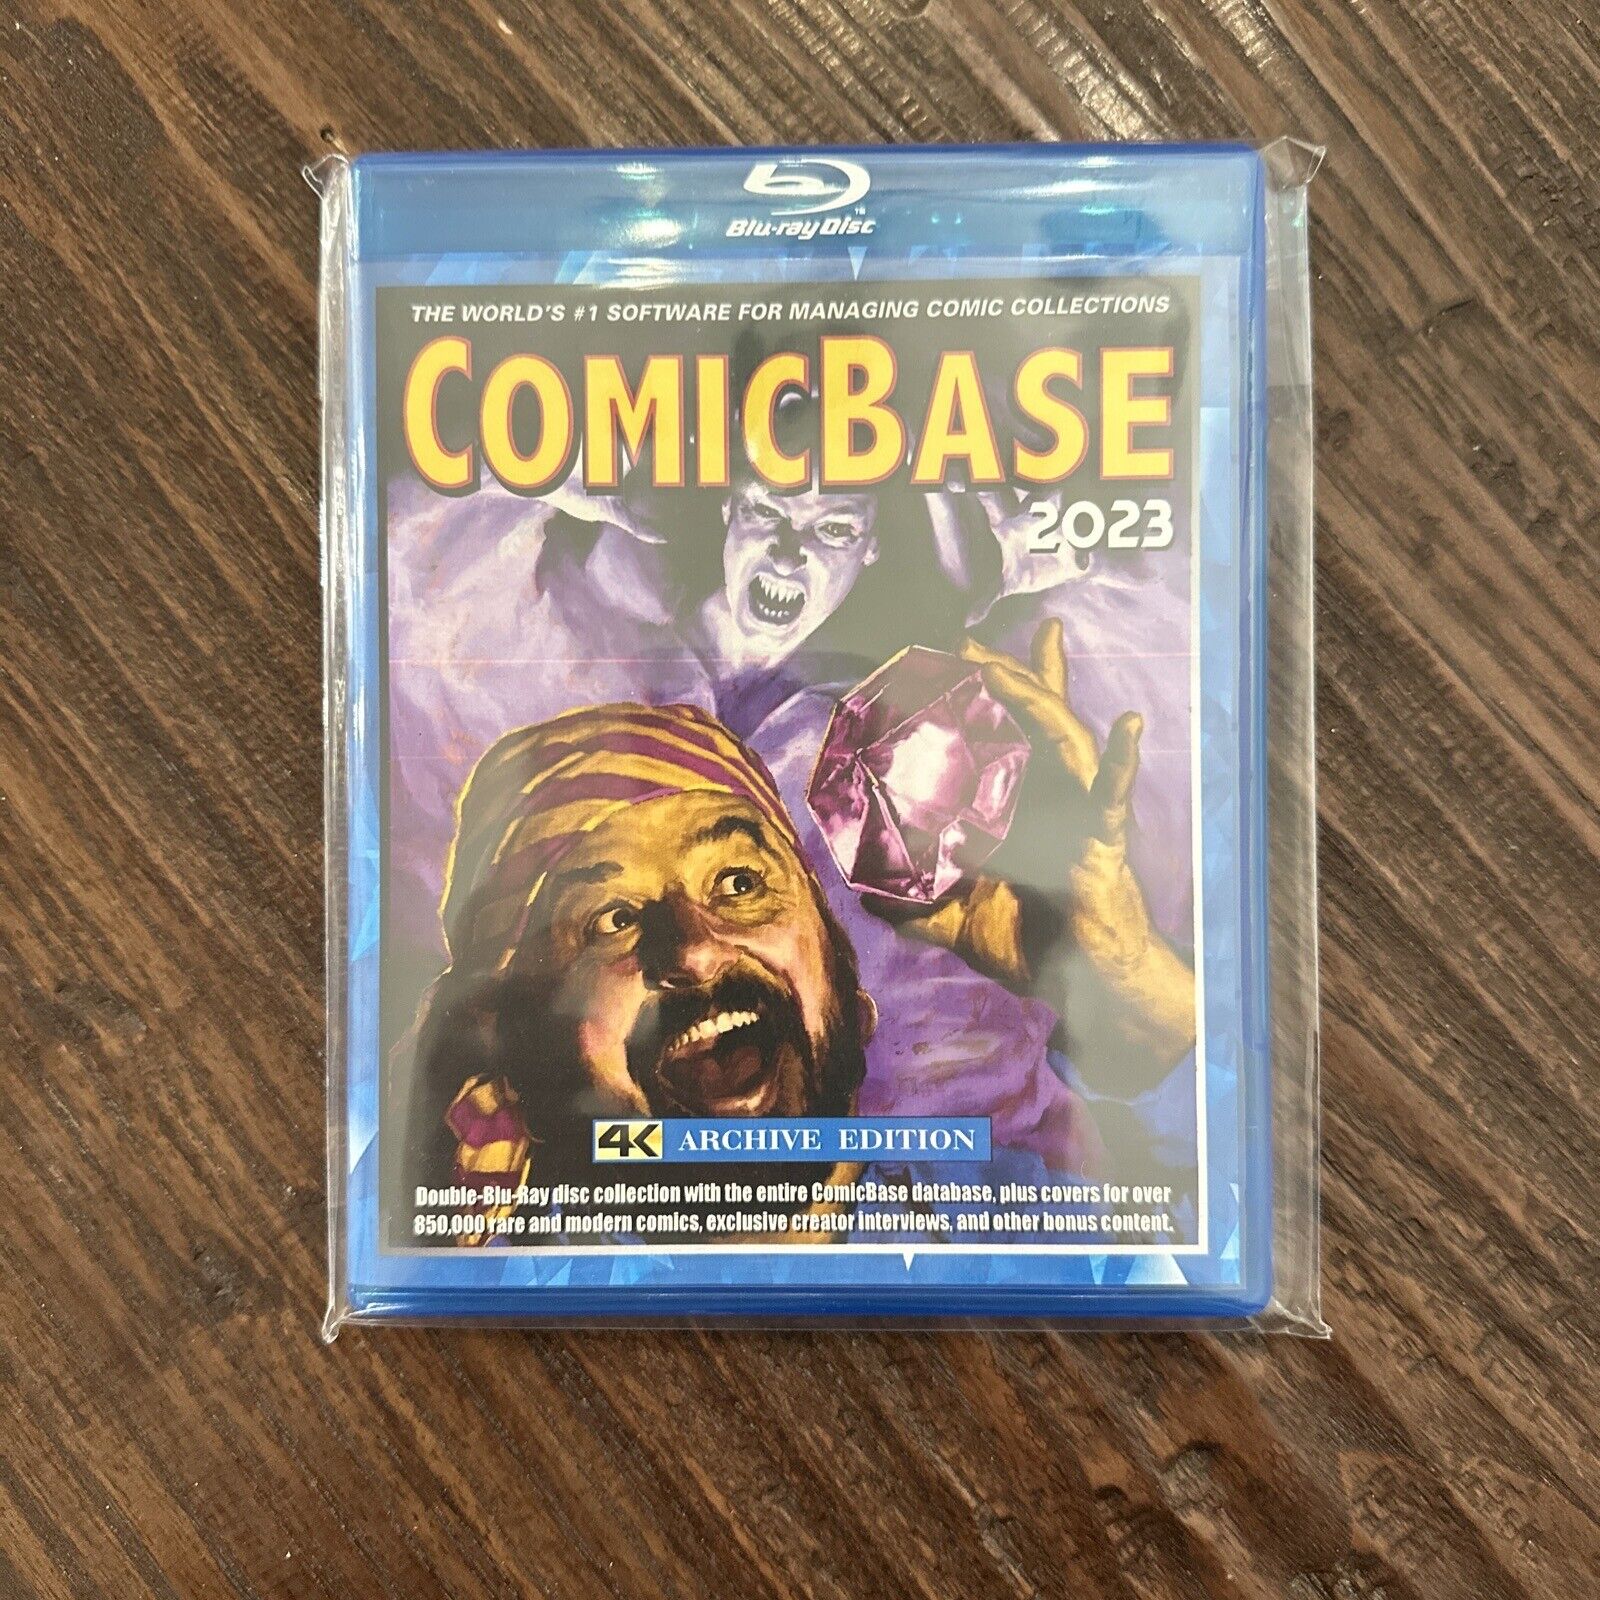 ComicBase 2023 DVD (2 Disc Set) 4K ARCHIVE EDITION Software